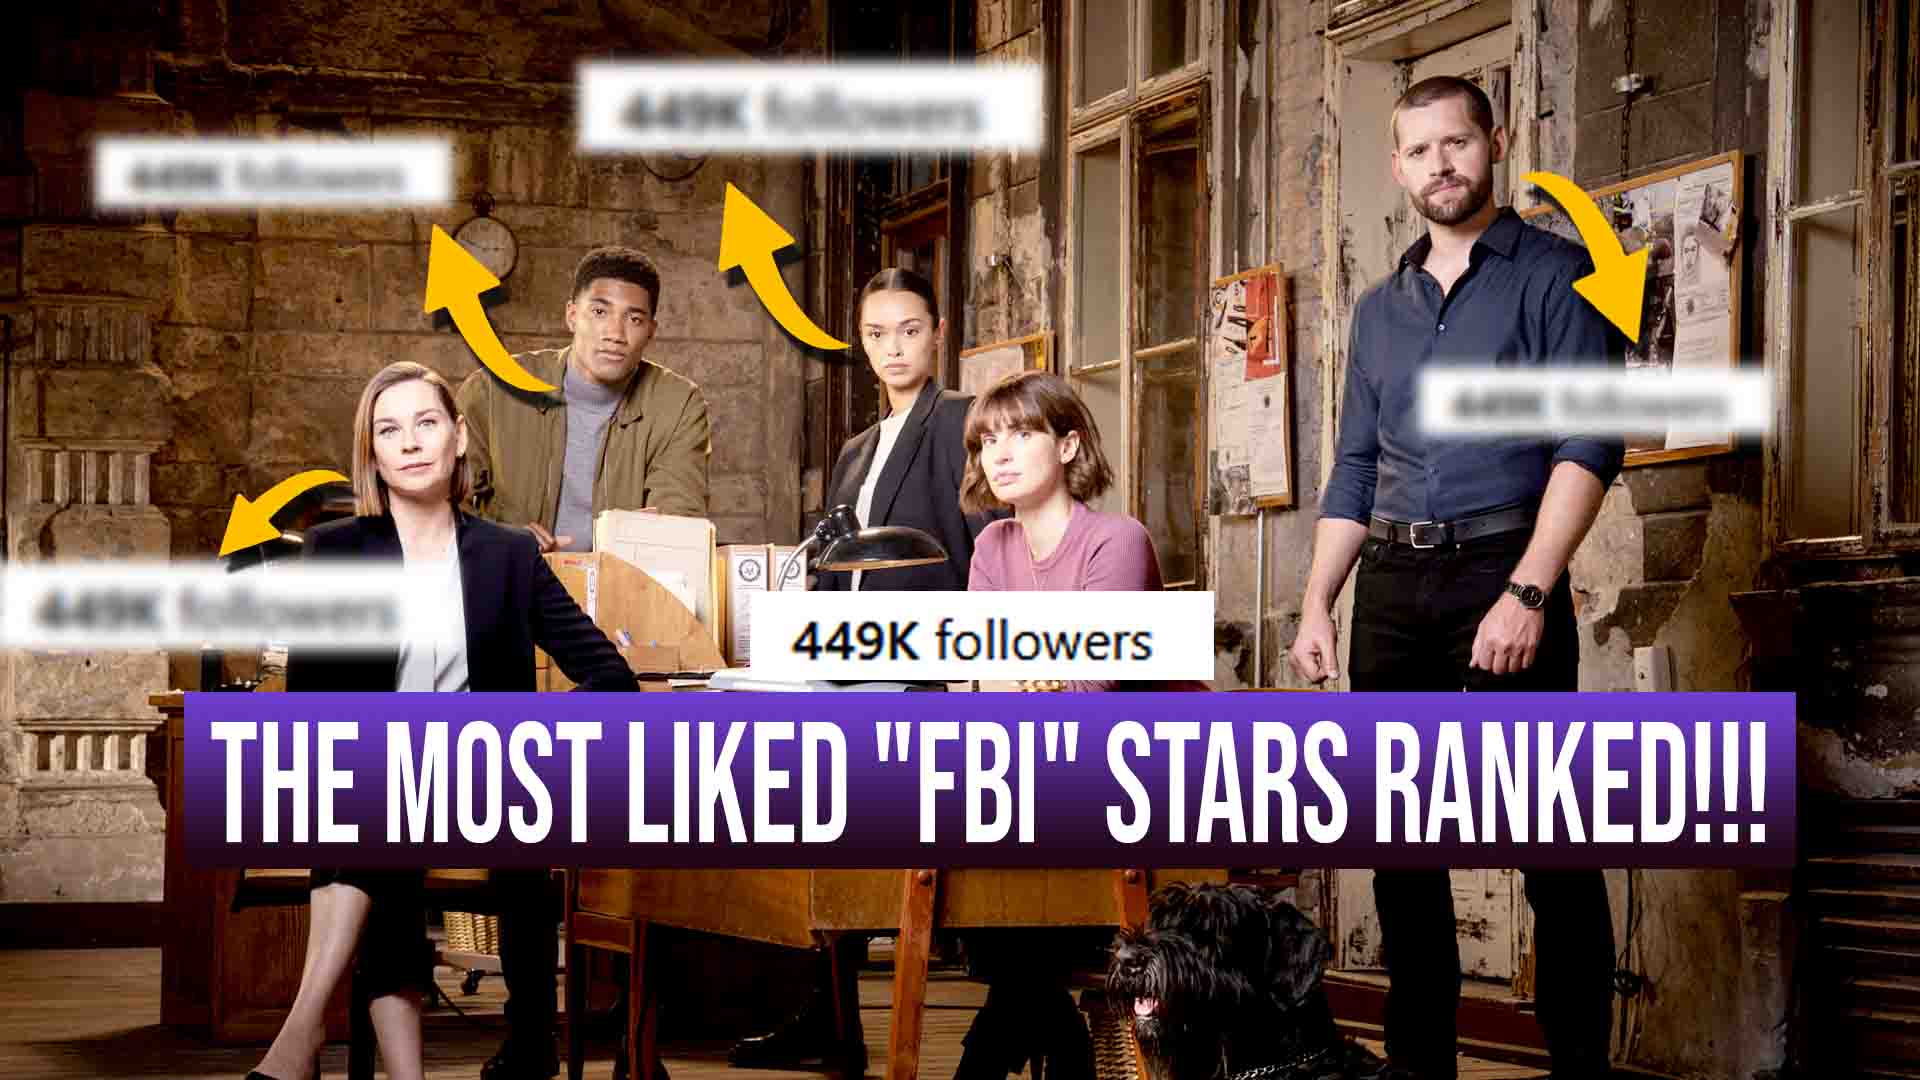 The Most Liked “FBI” Stars Ranked From Lowest to Highest